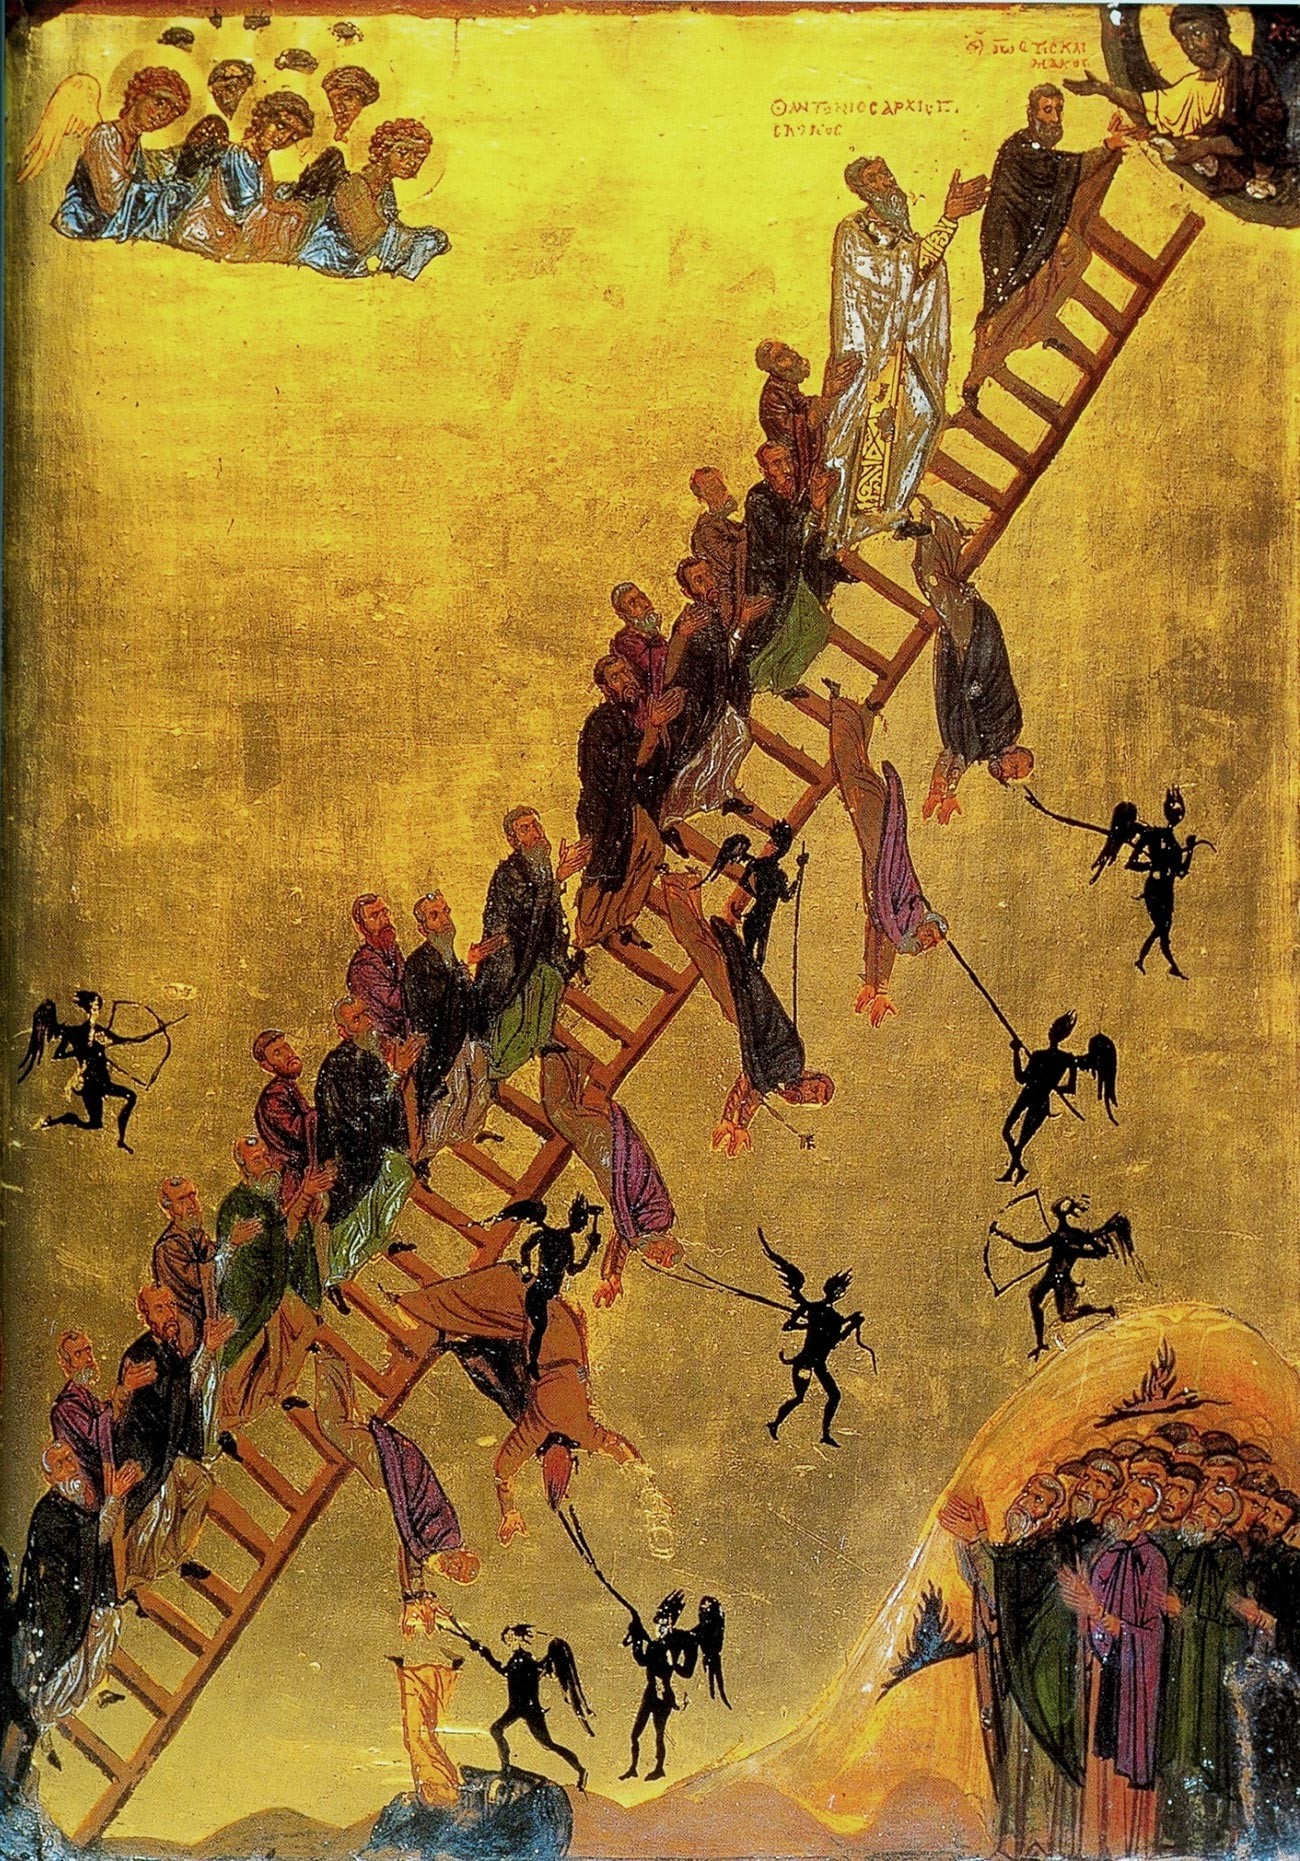 The 12th century Ladder of Divine Ascent icon (Saint Catherine's Monastery, Sinai Peninsula, Egypt) showing monks, led by John Climacus, ascending the ladder to Jesus, at the top right.